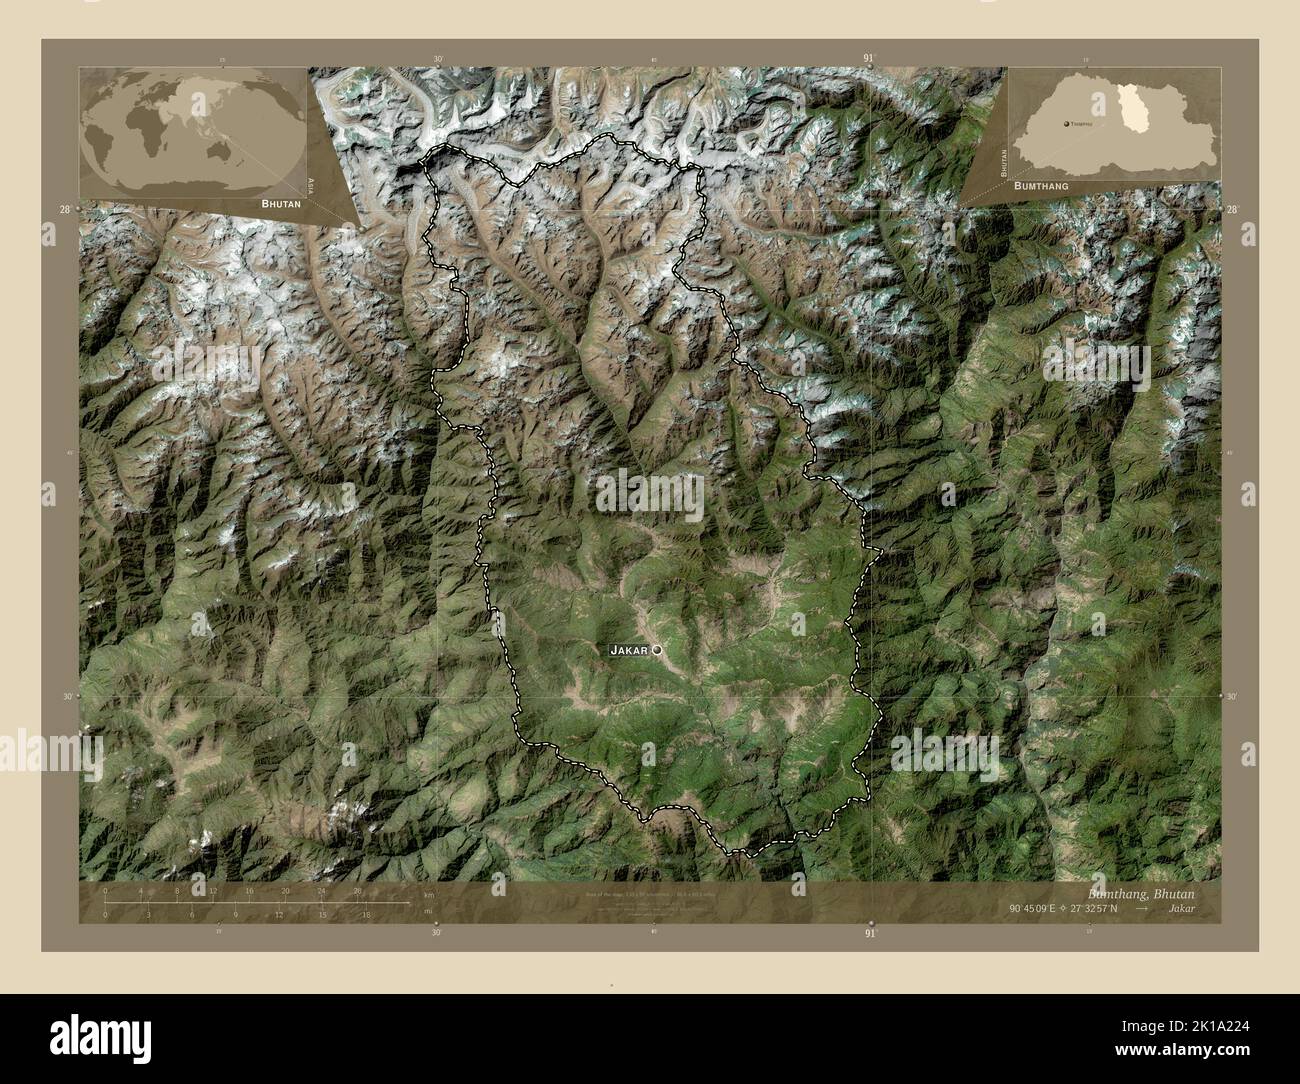 Bumthang, district of Bhutan. High resolution satellite map. Locations ...